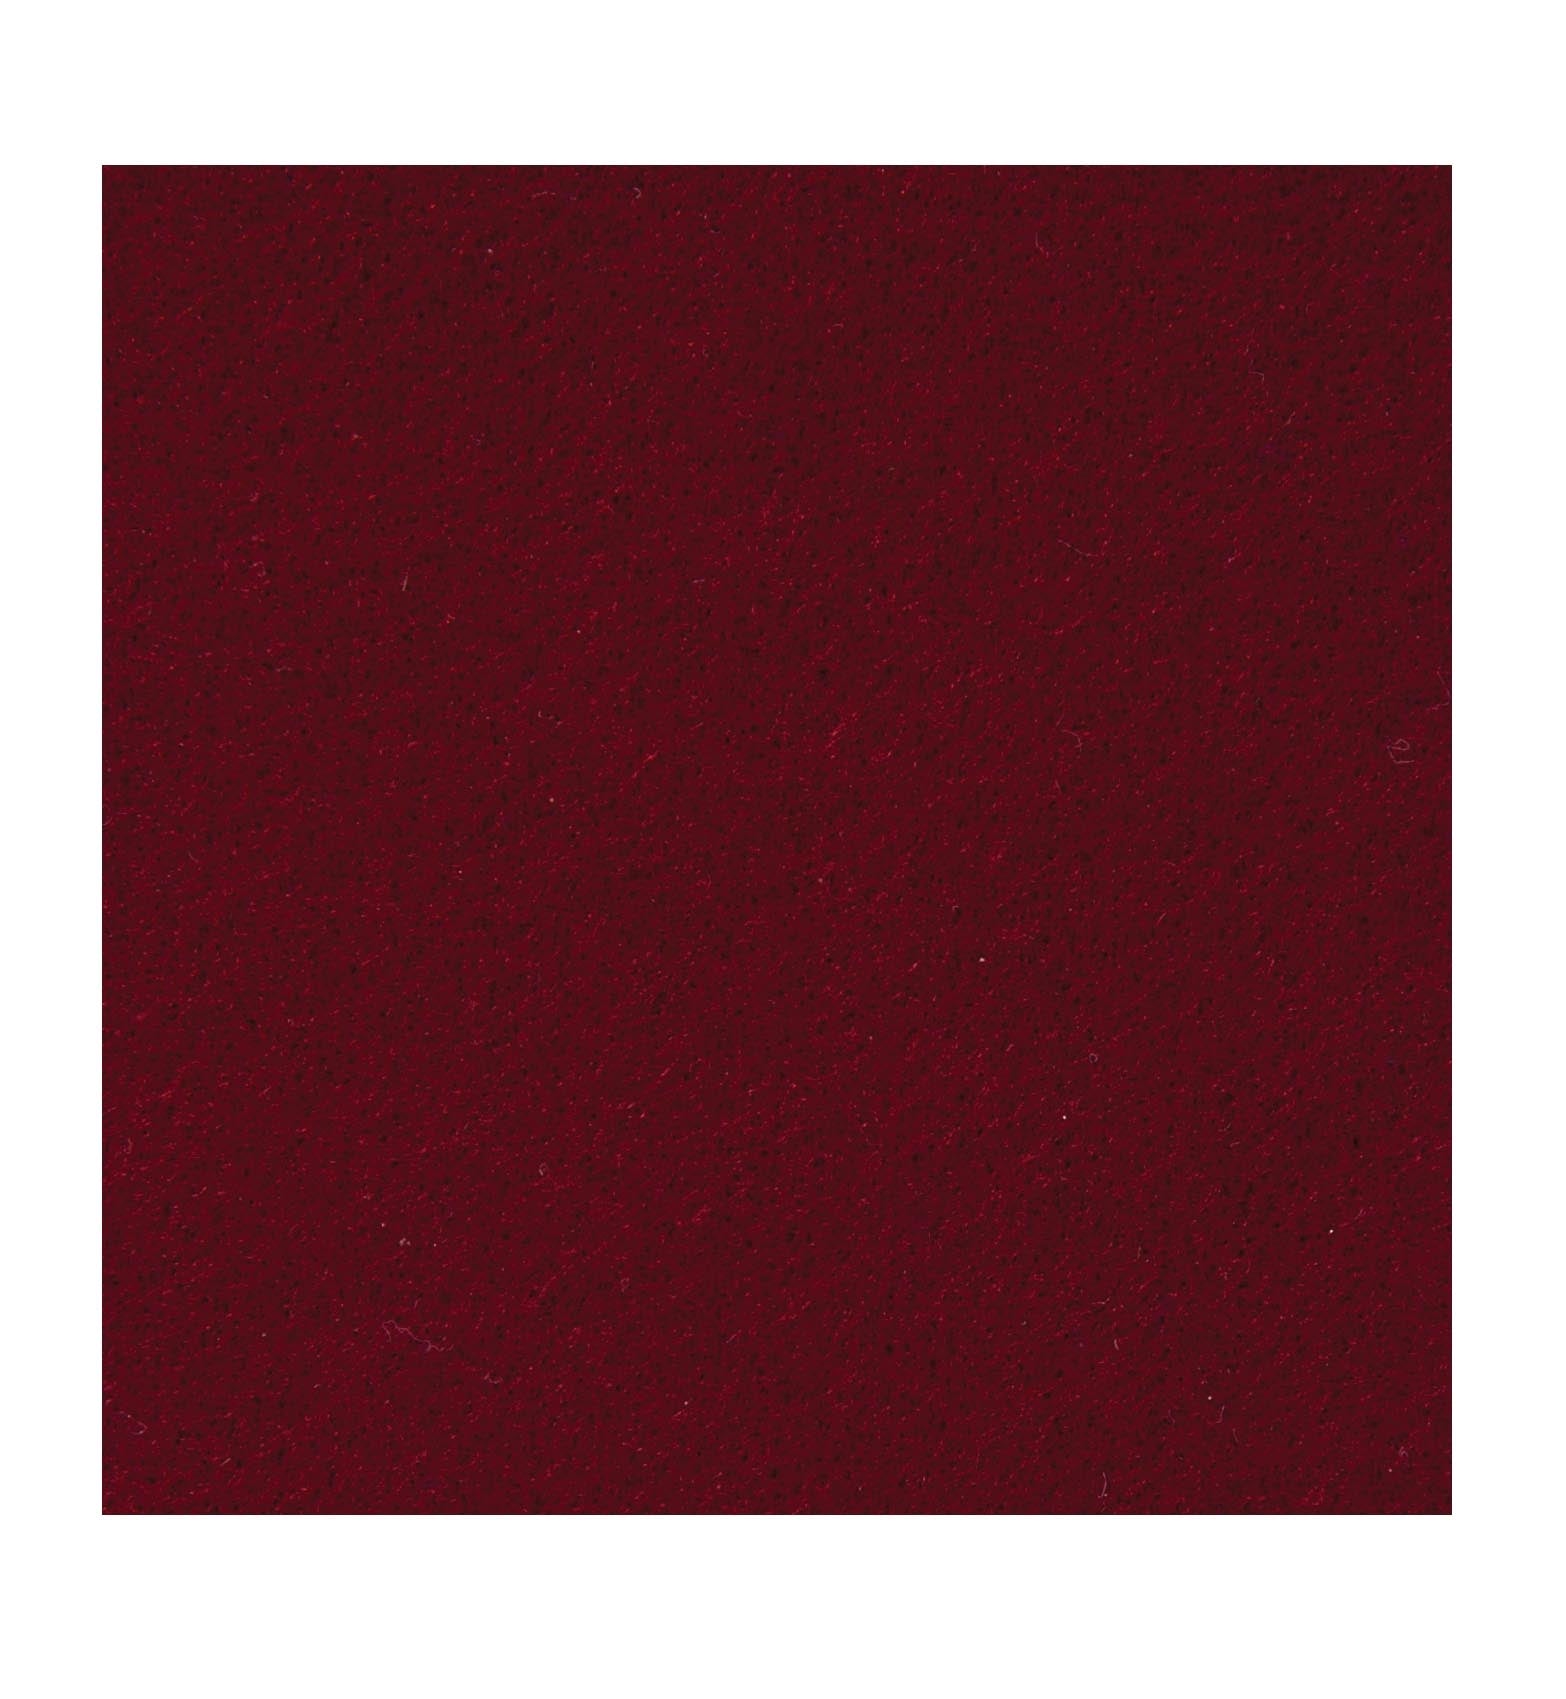 36 Inch Square Soft Wine Color Adhesive Backed Felt